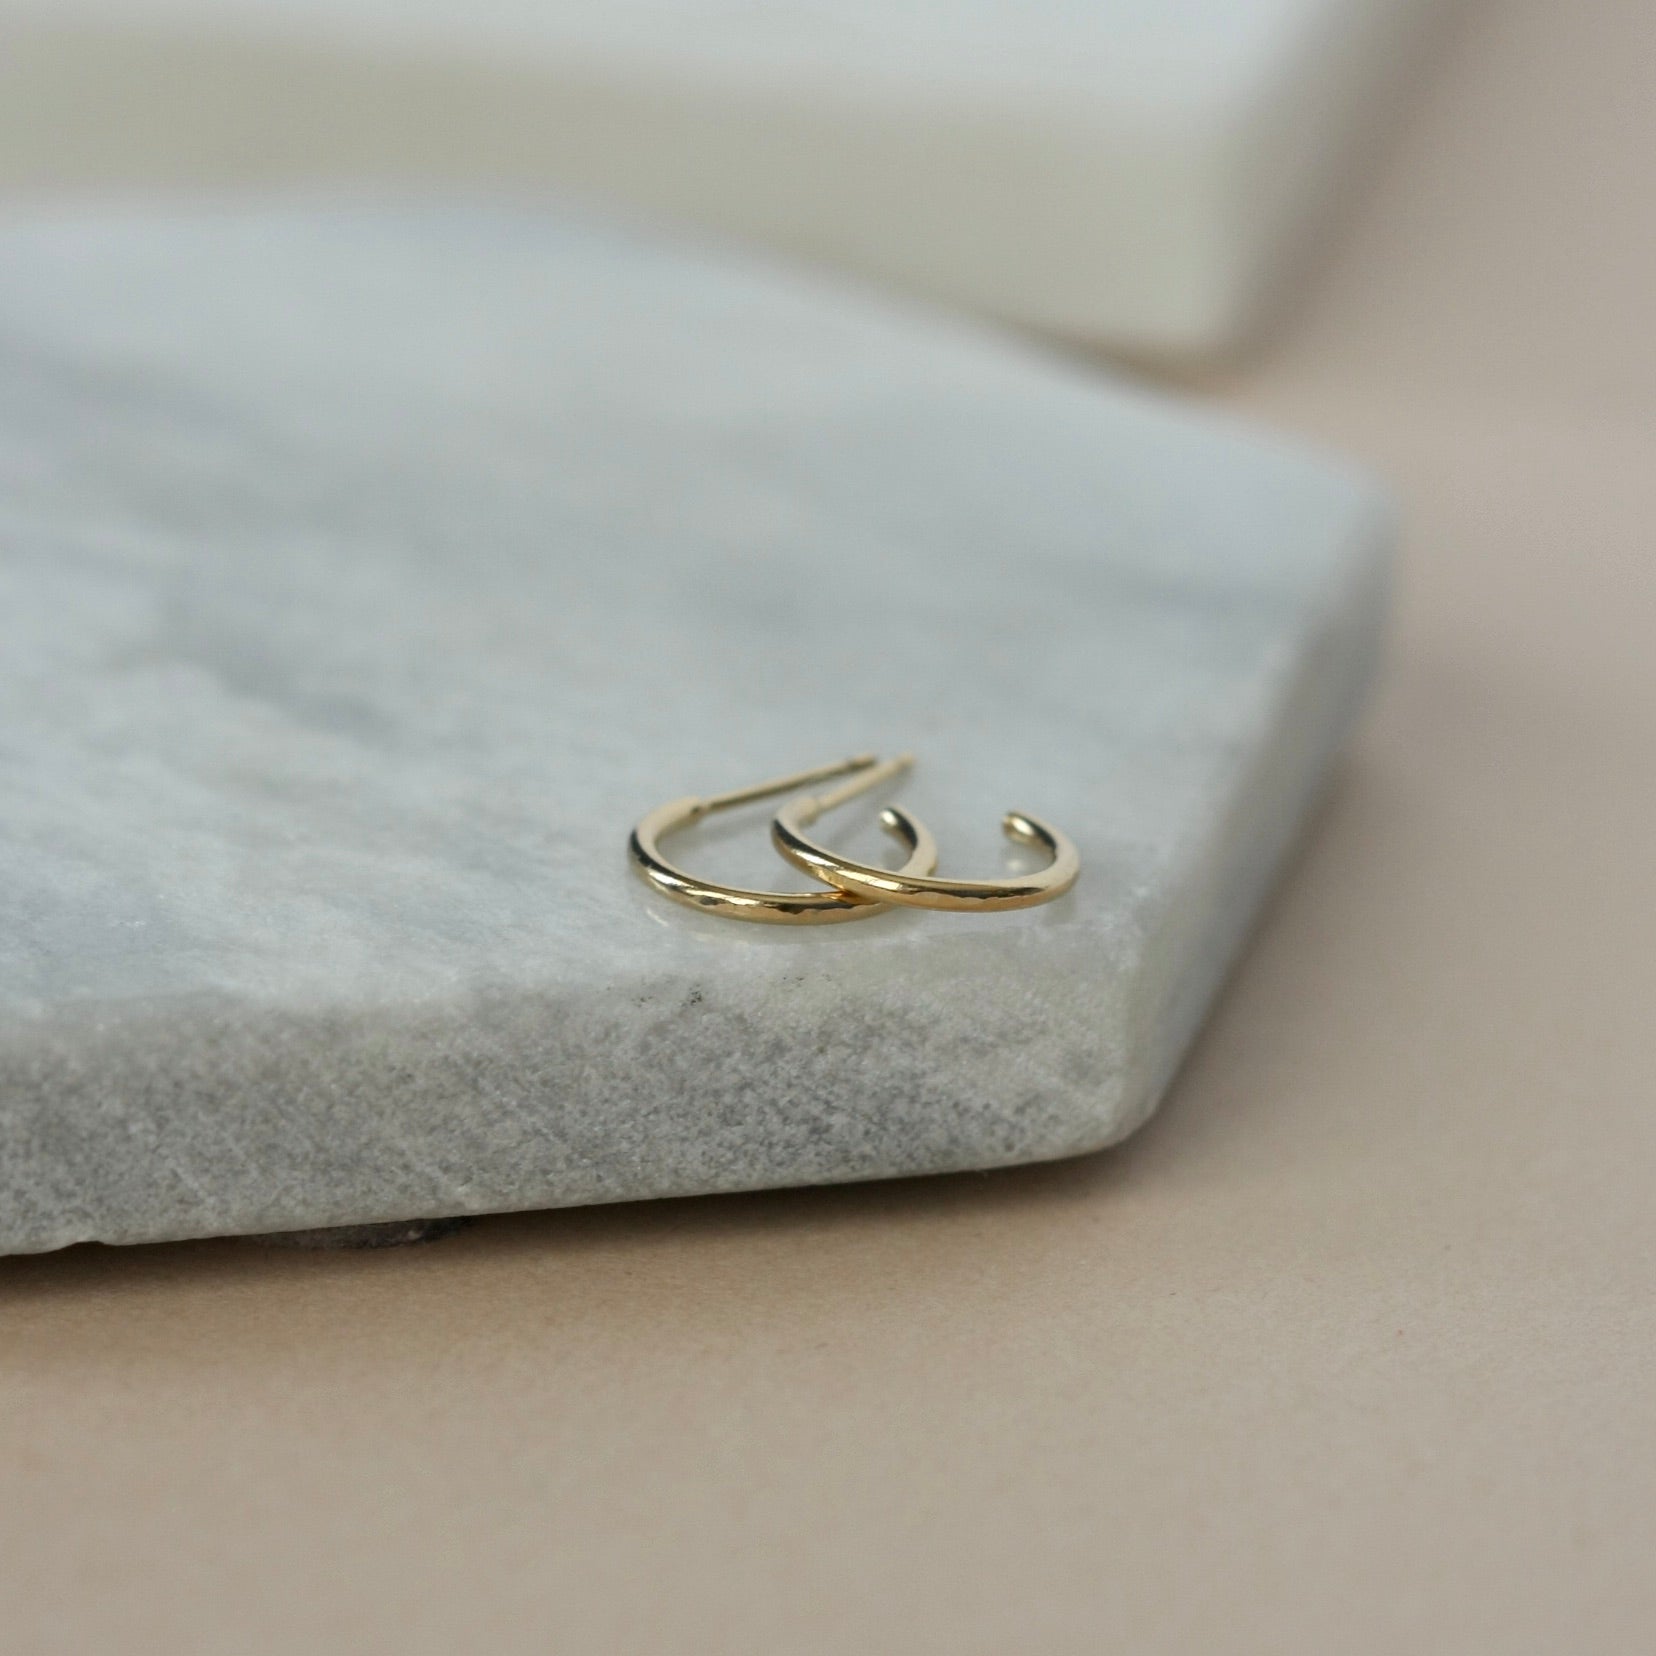 Small Hammered Gold Hoop Earrings